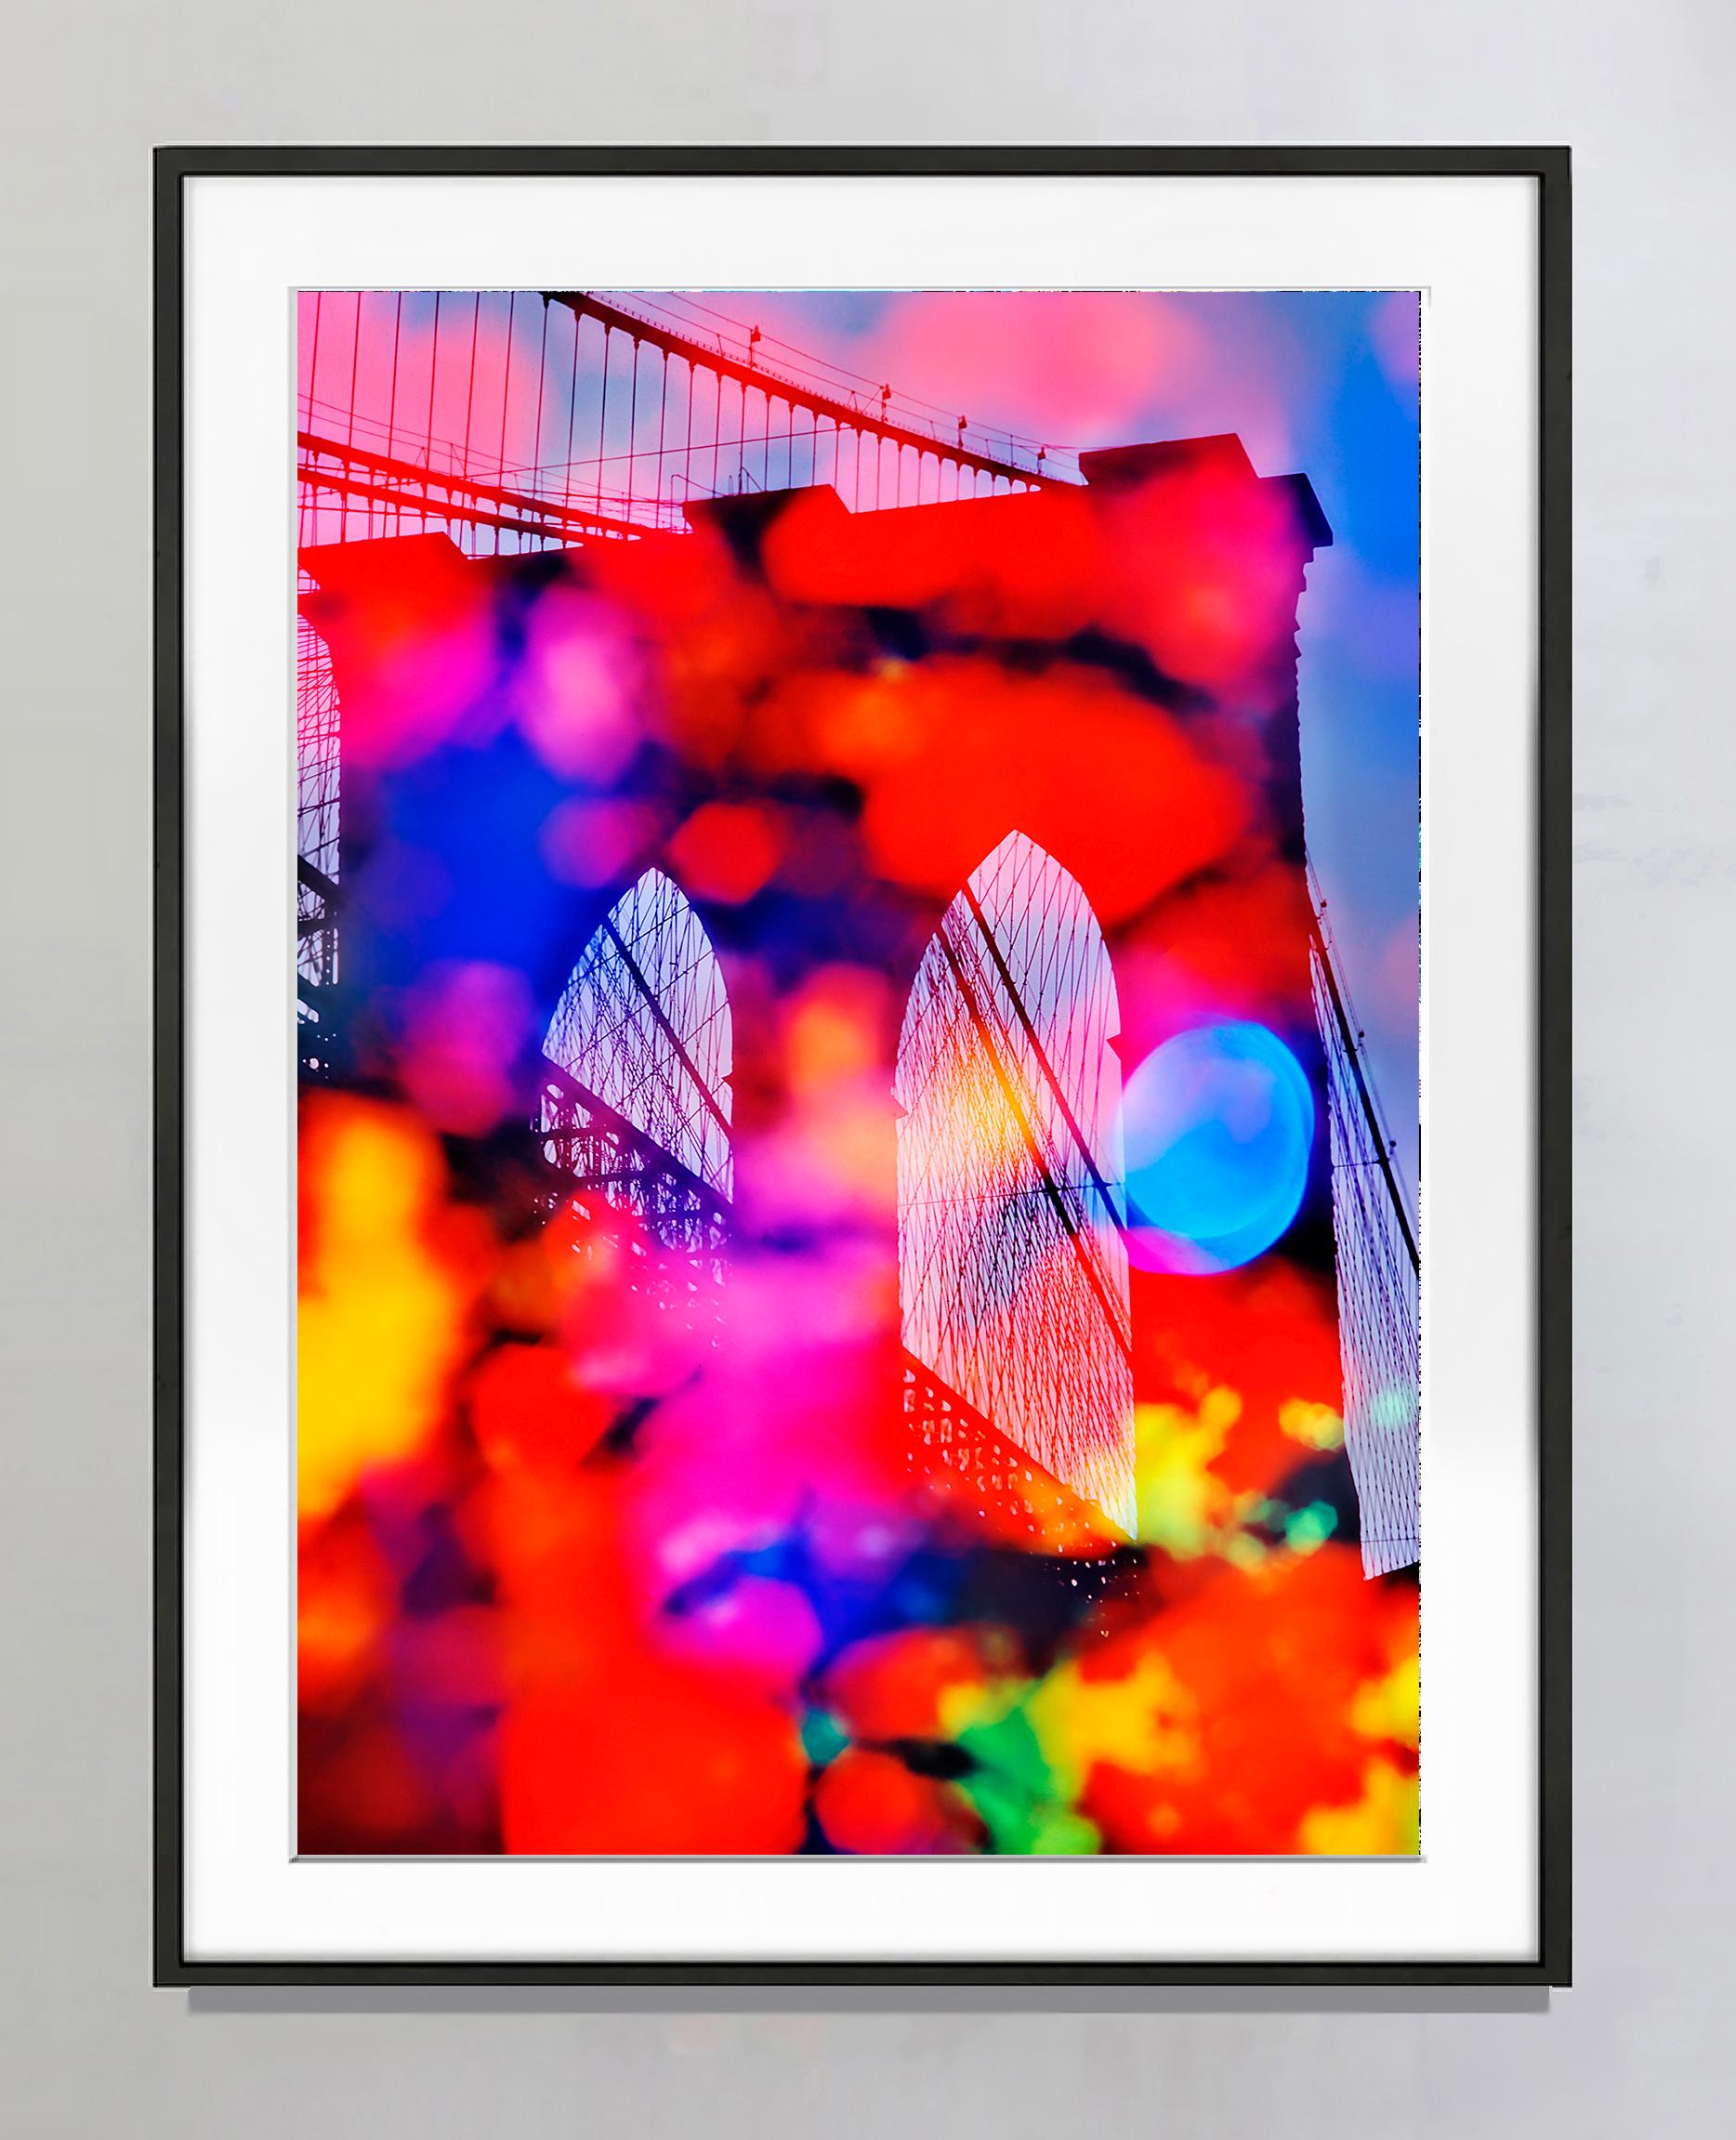 Brooklyn Bridge Abstraction with  Romantic Out of Focus Floral Colors  - Photograph by Mitchell Funk